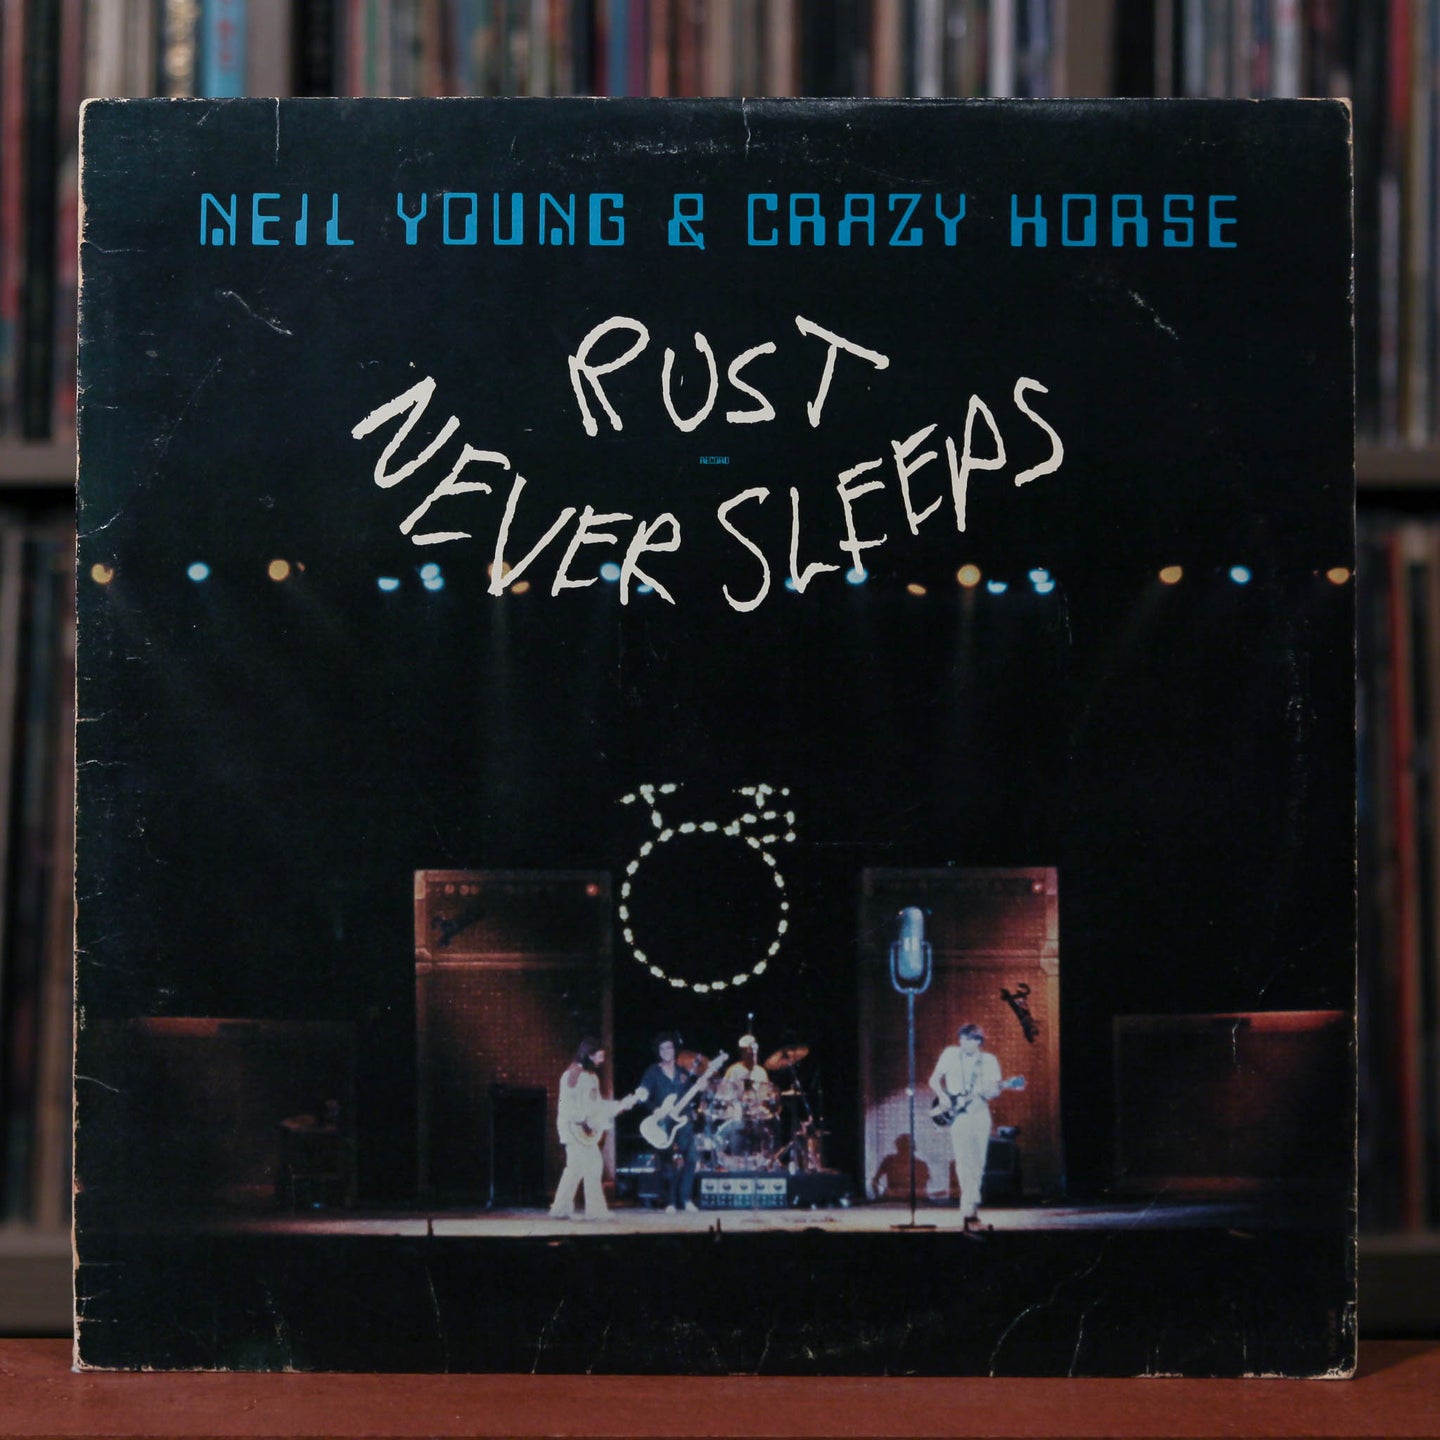 Neil Young - Rust Never Sleeps - 1979 Reprise, VG/VG